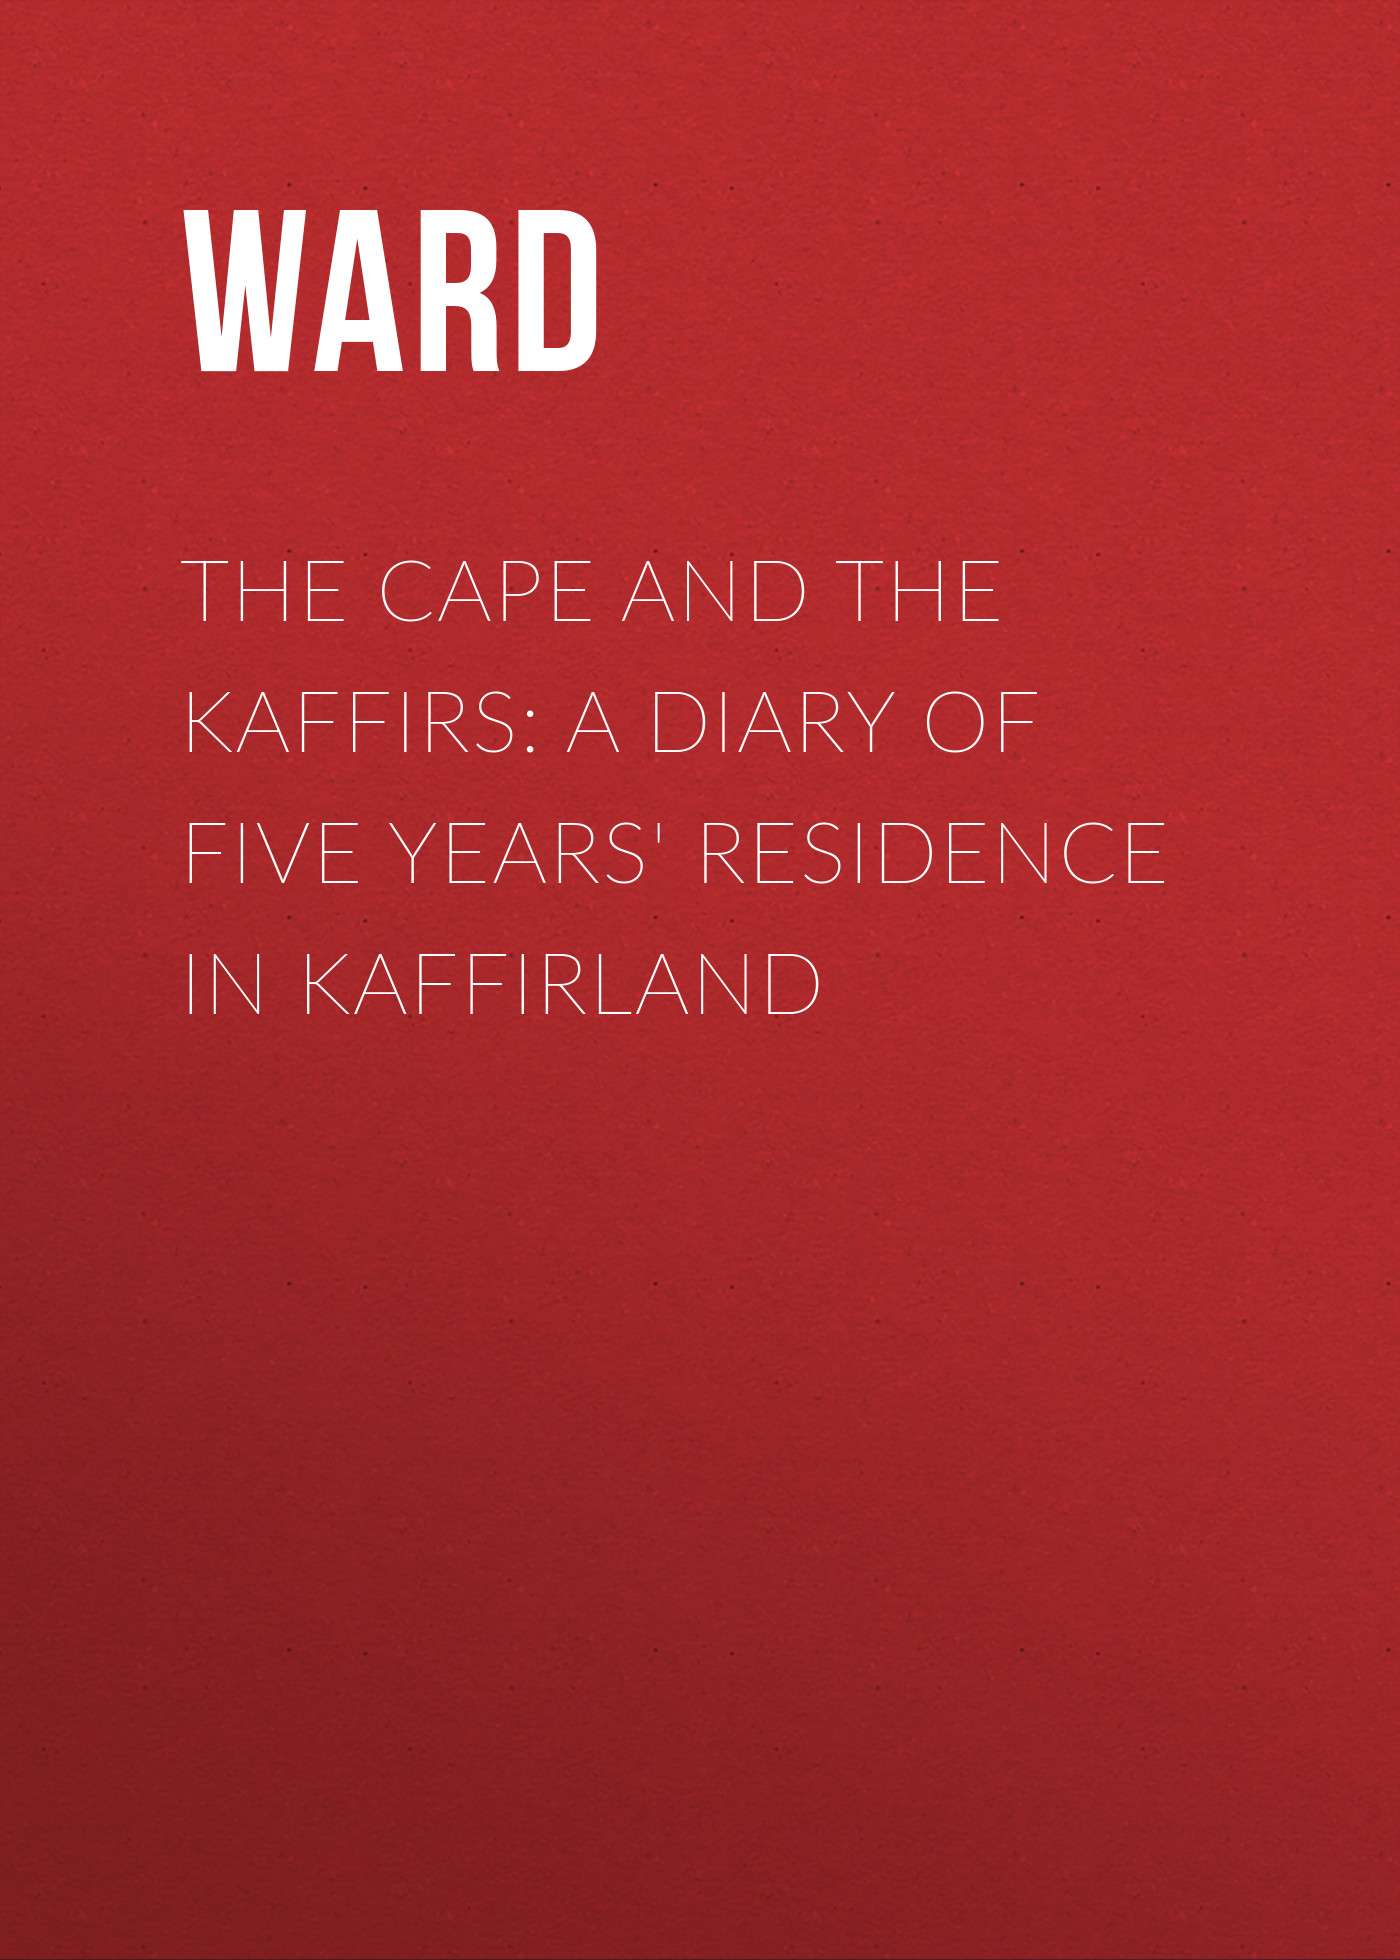 The Cape and the Kaffirs: A Diary of Five Years'Residence in Kaffirland